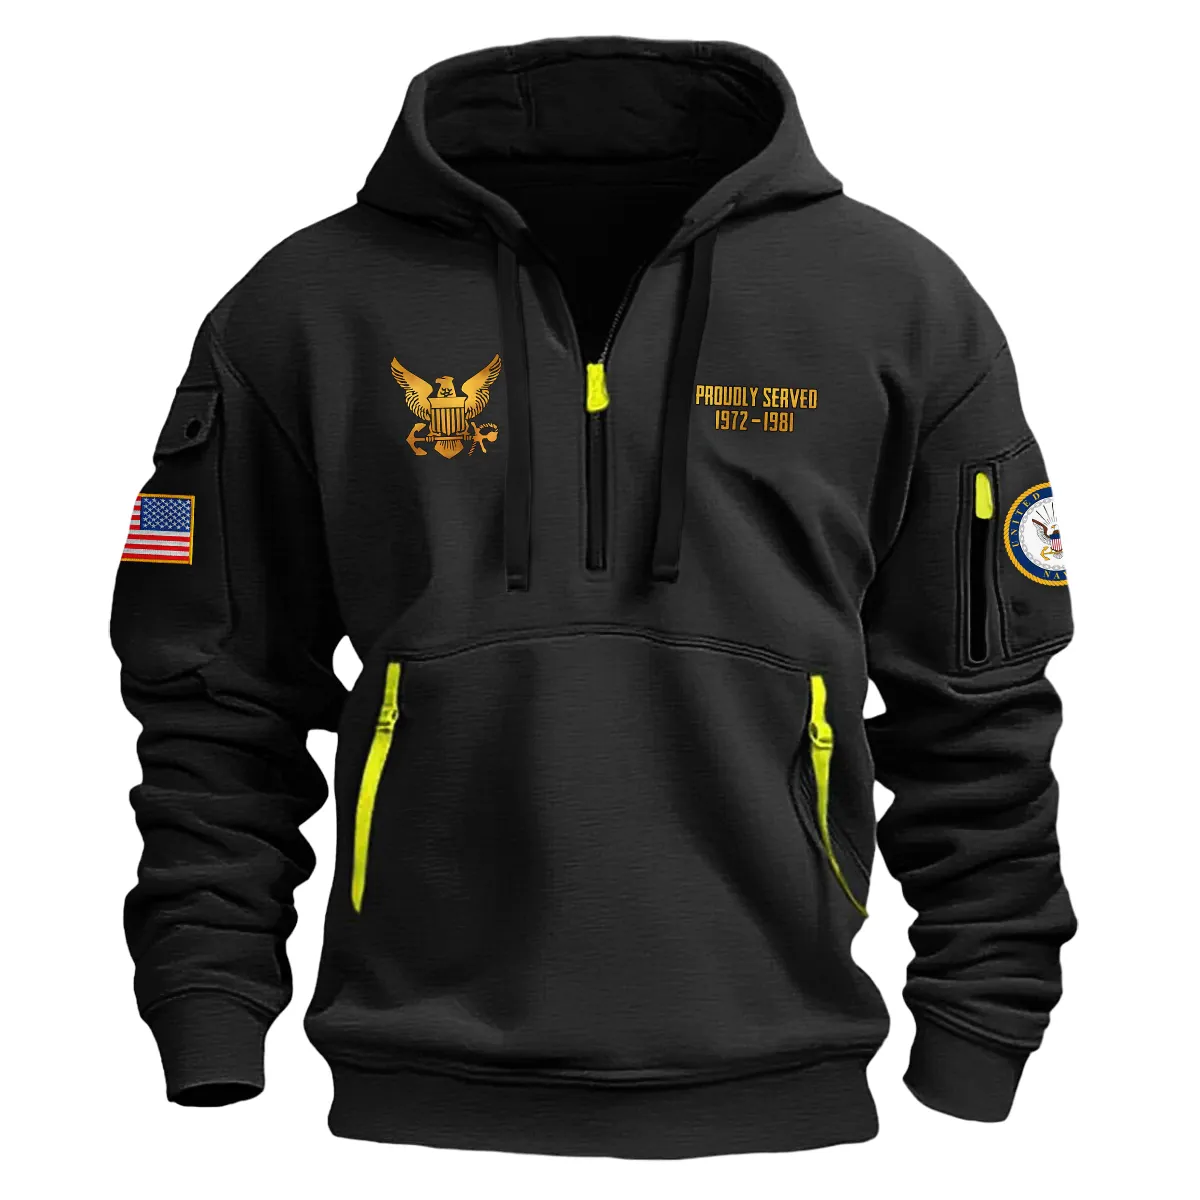 US Military All Branches! Personalized Gift Petty Officer 1st Class U.S. Navy Fashion Hoodie Half Zipper